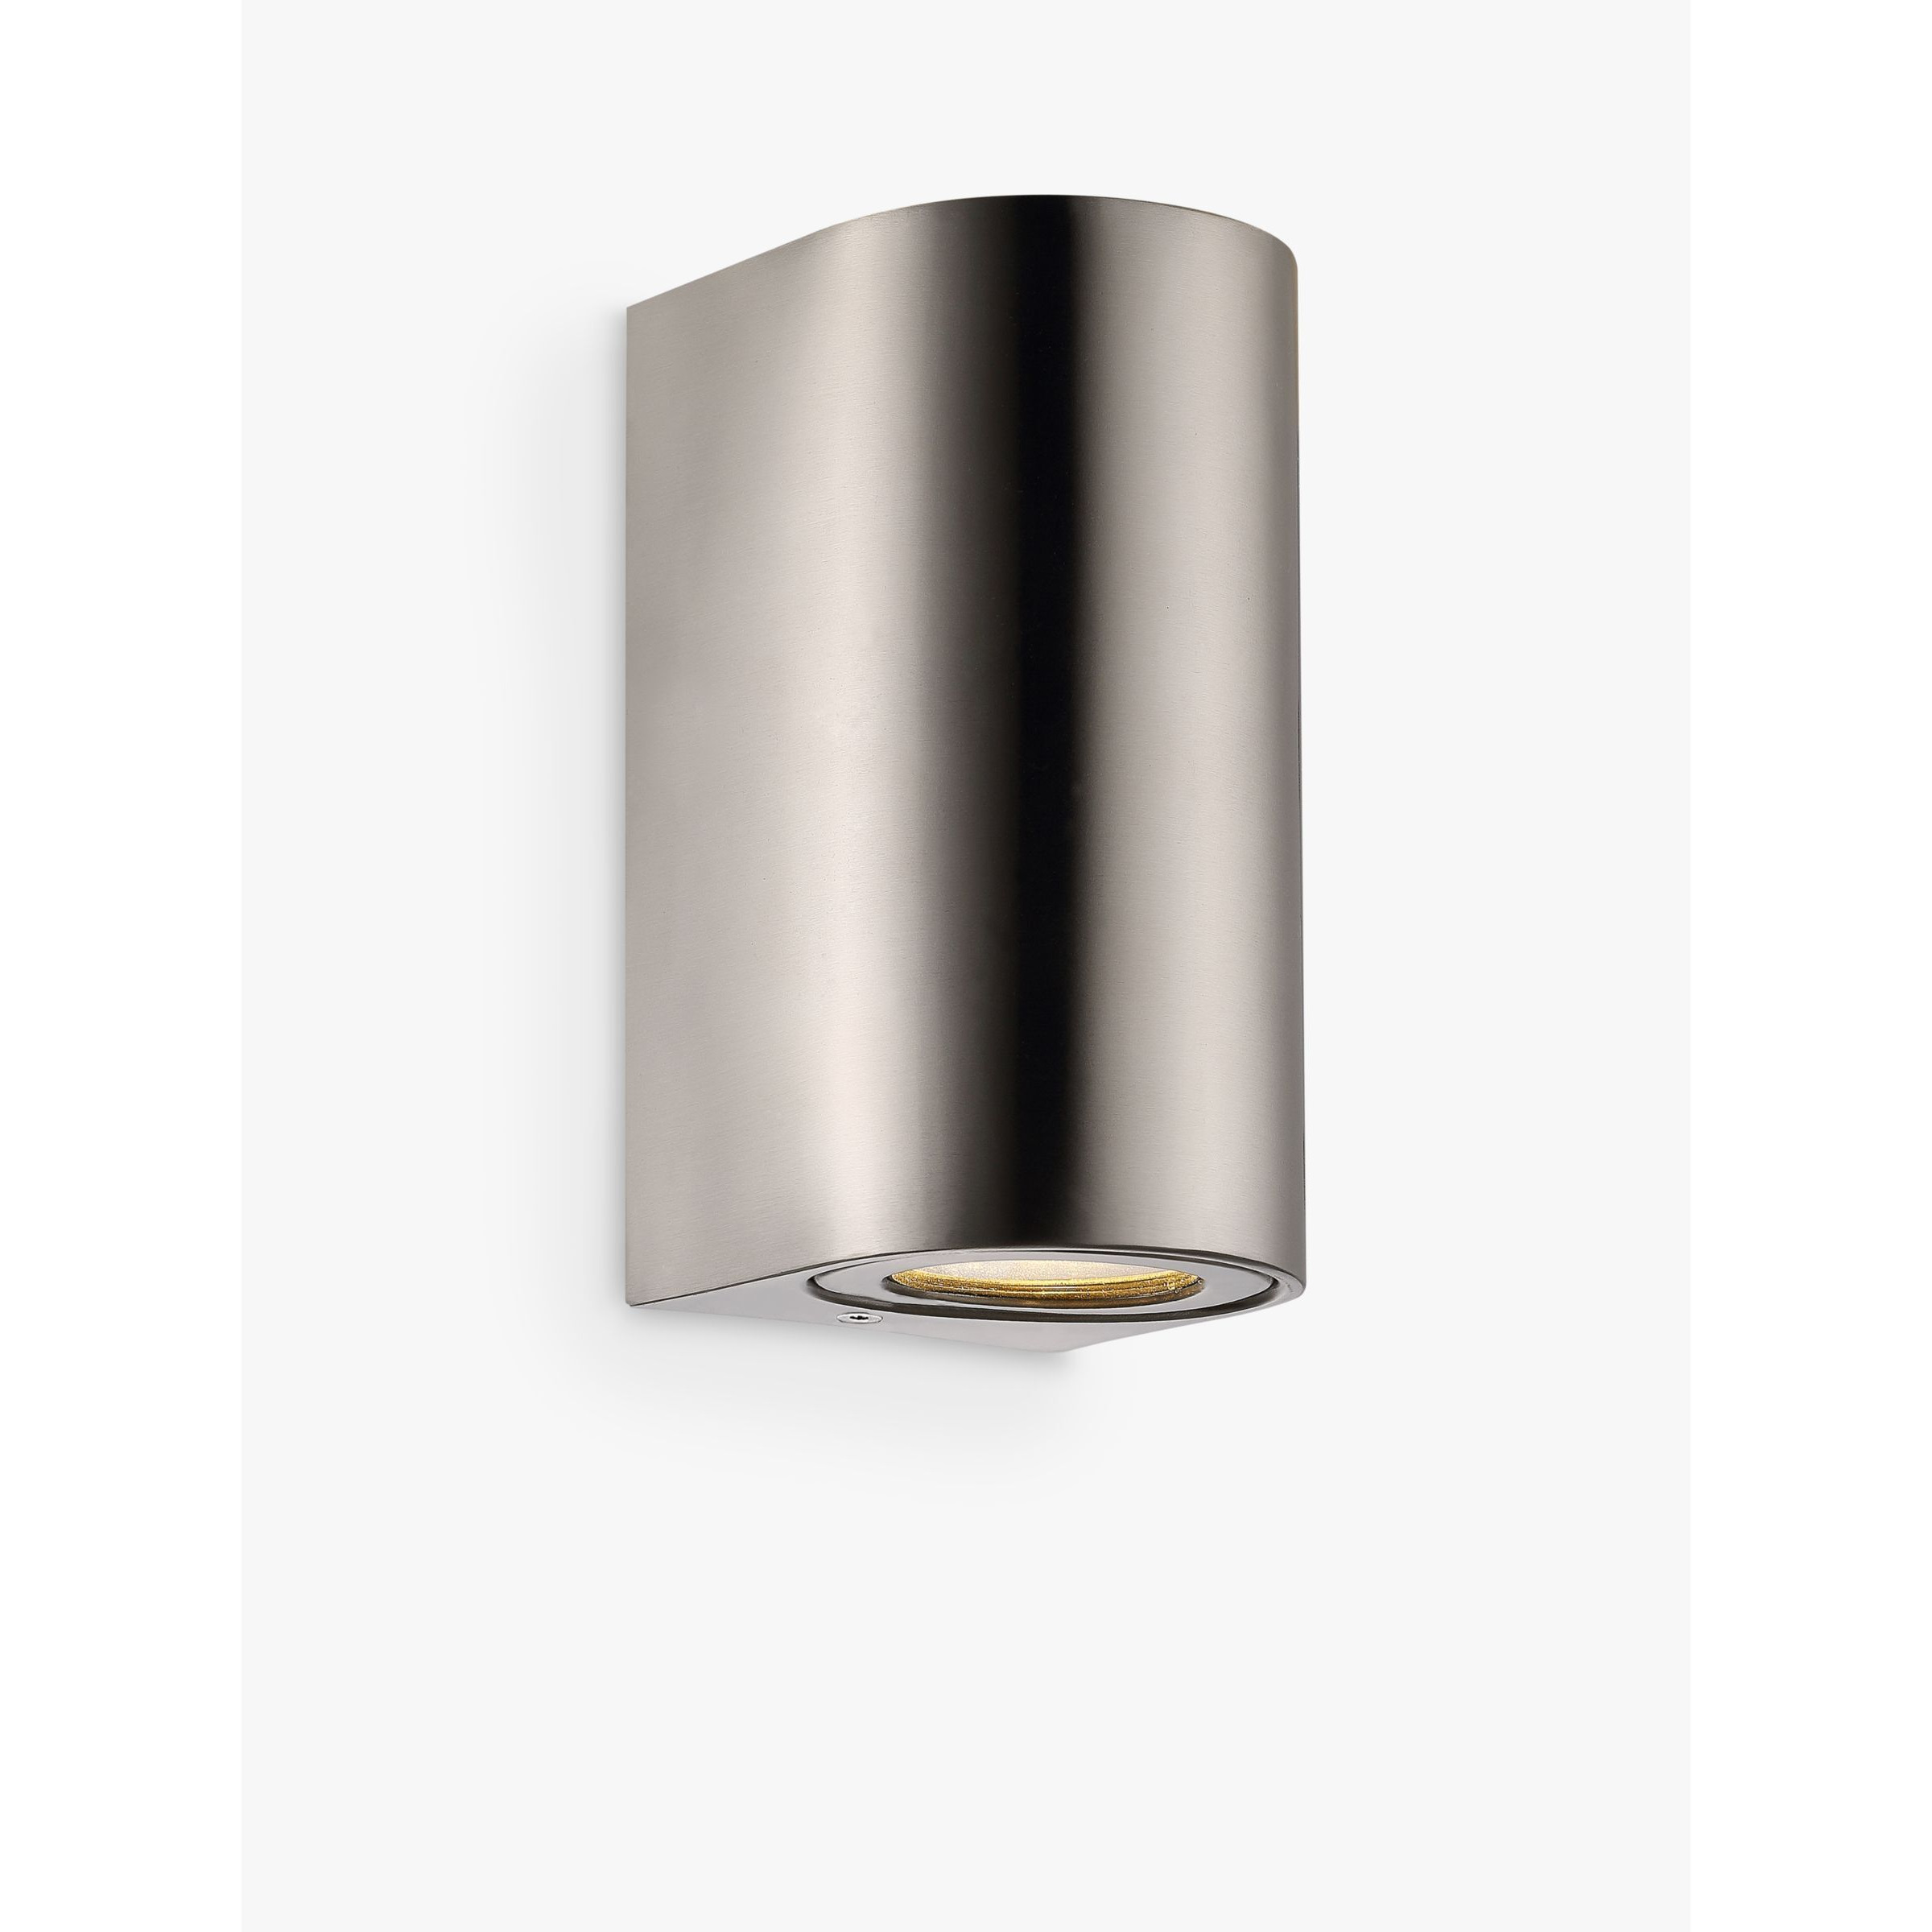 Nordlux Canto Max 2.0 Indoor / Outdoor Wall Light - image 1